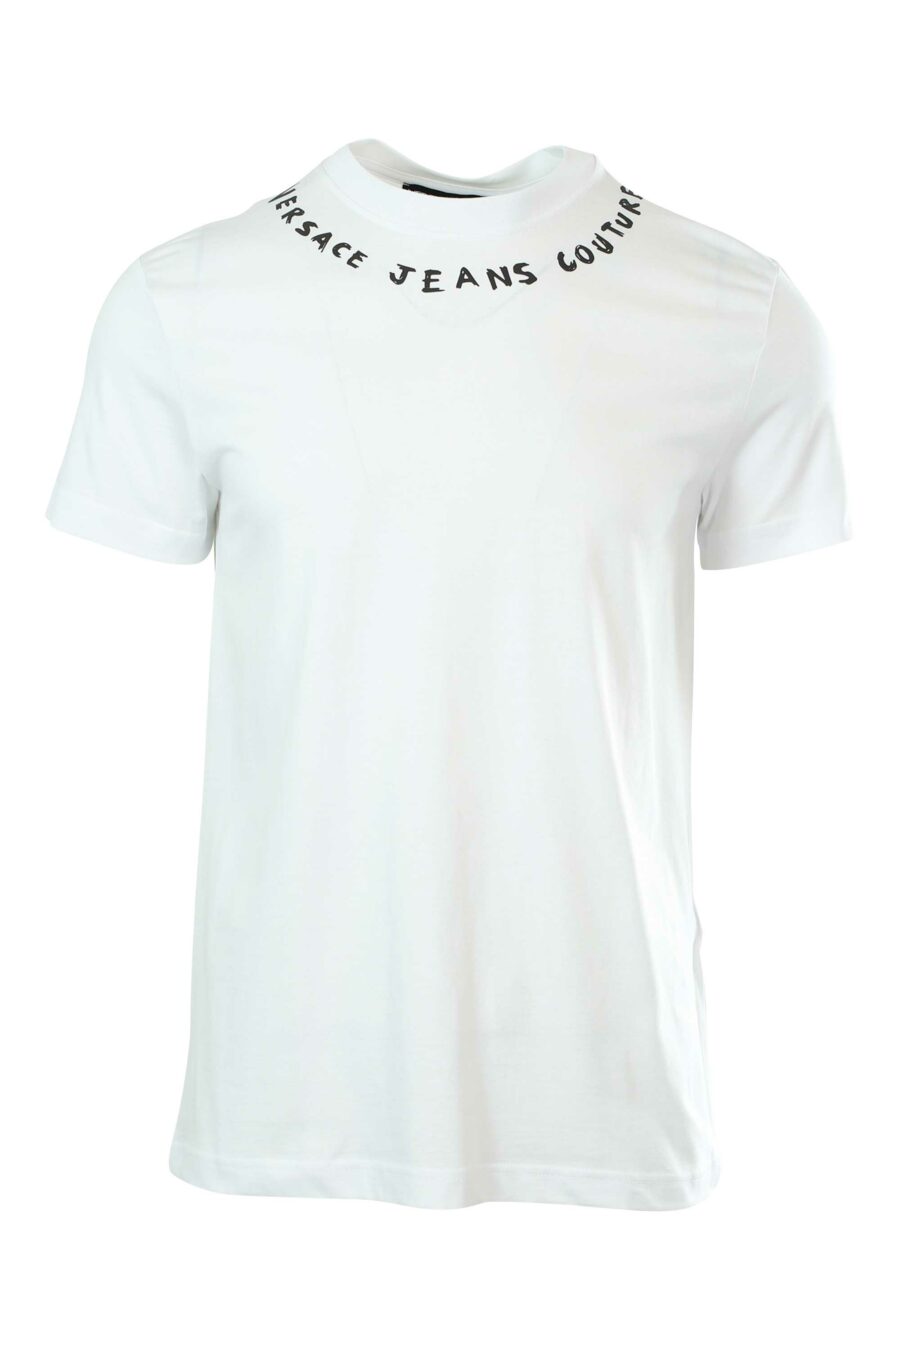 White T-shirt with logo on collar - 8052019237092